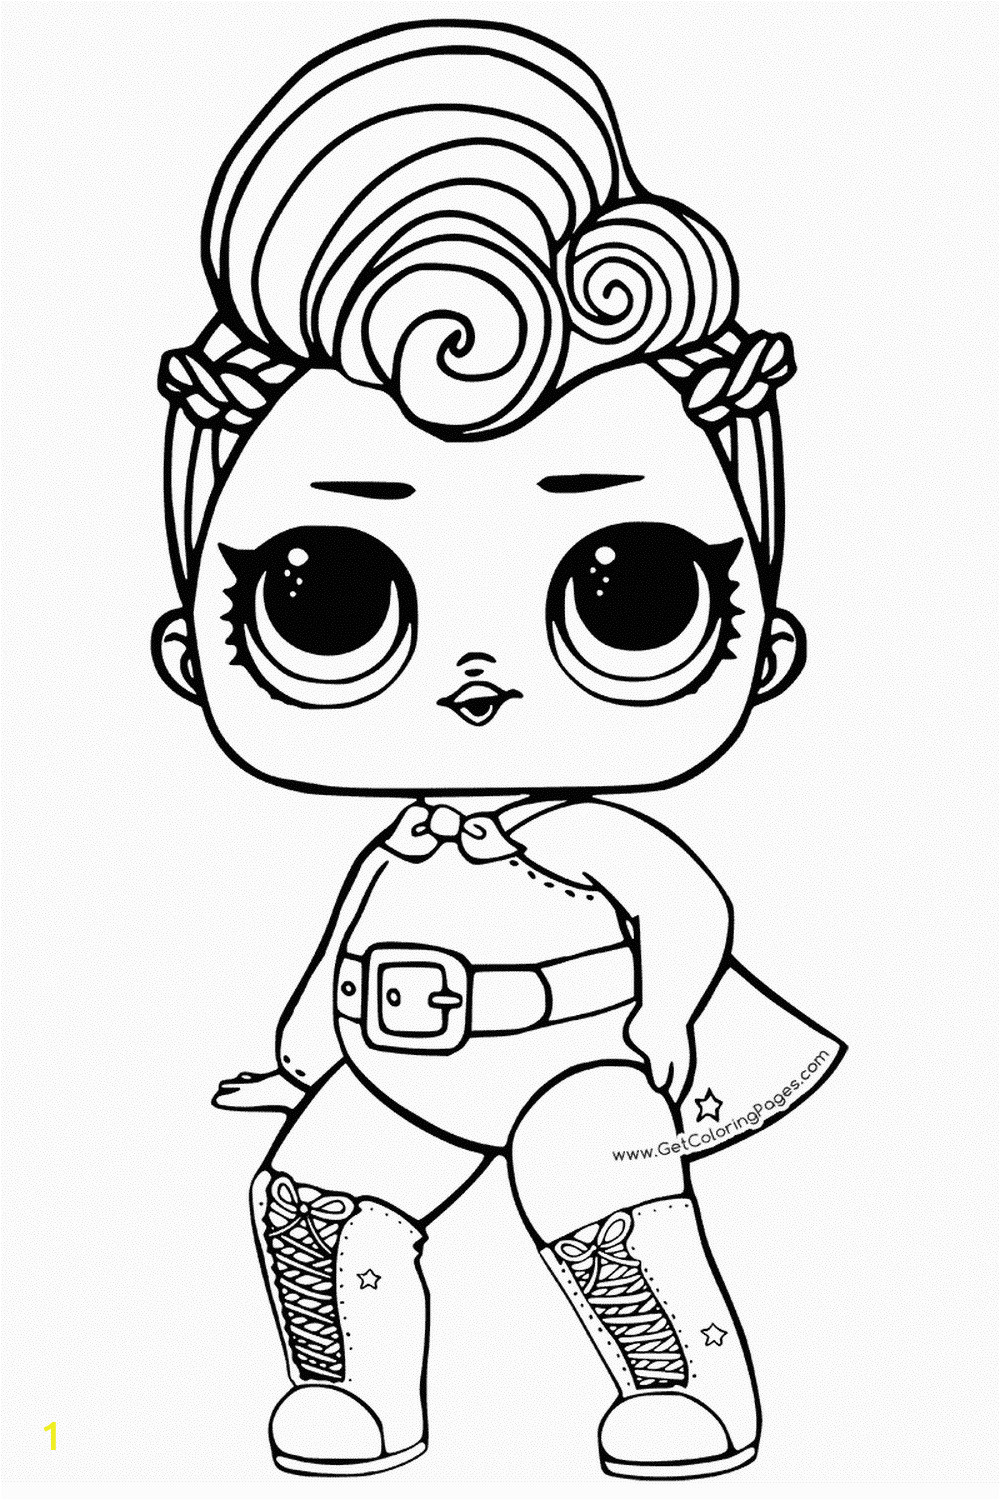 Lol Surprise Doll Coloring Pages Printable Lol Surprise Dolls Coloring Pages Print them for Free